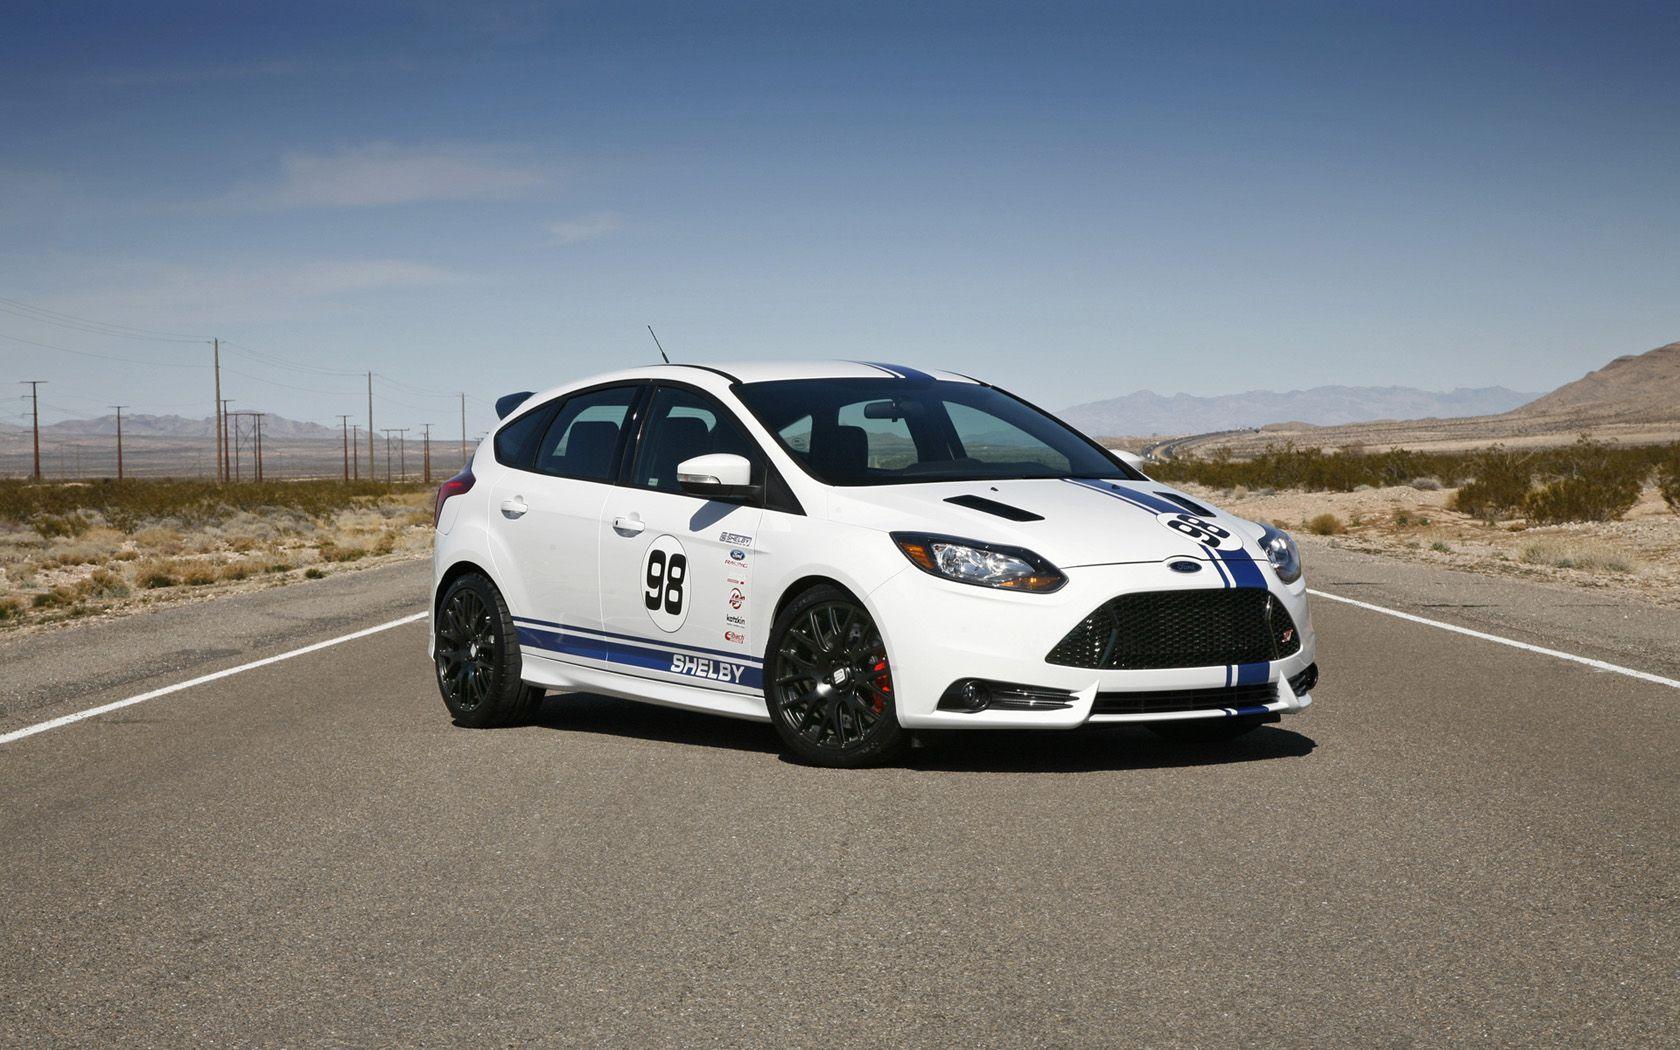 White Ford Focus St Wallpaper For Android. Ford focus st, Ford focus, Upcoming cars